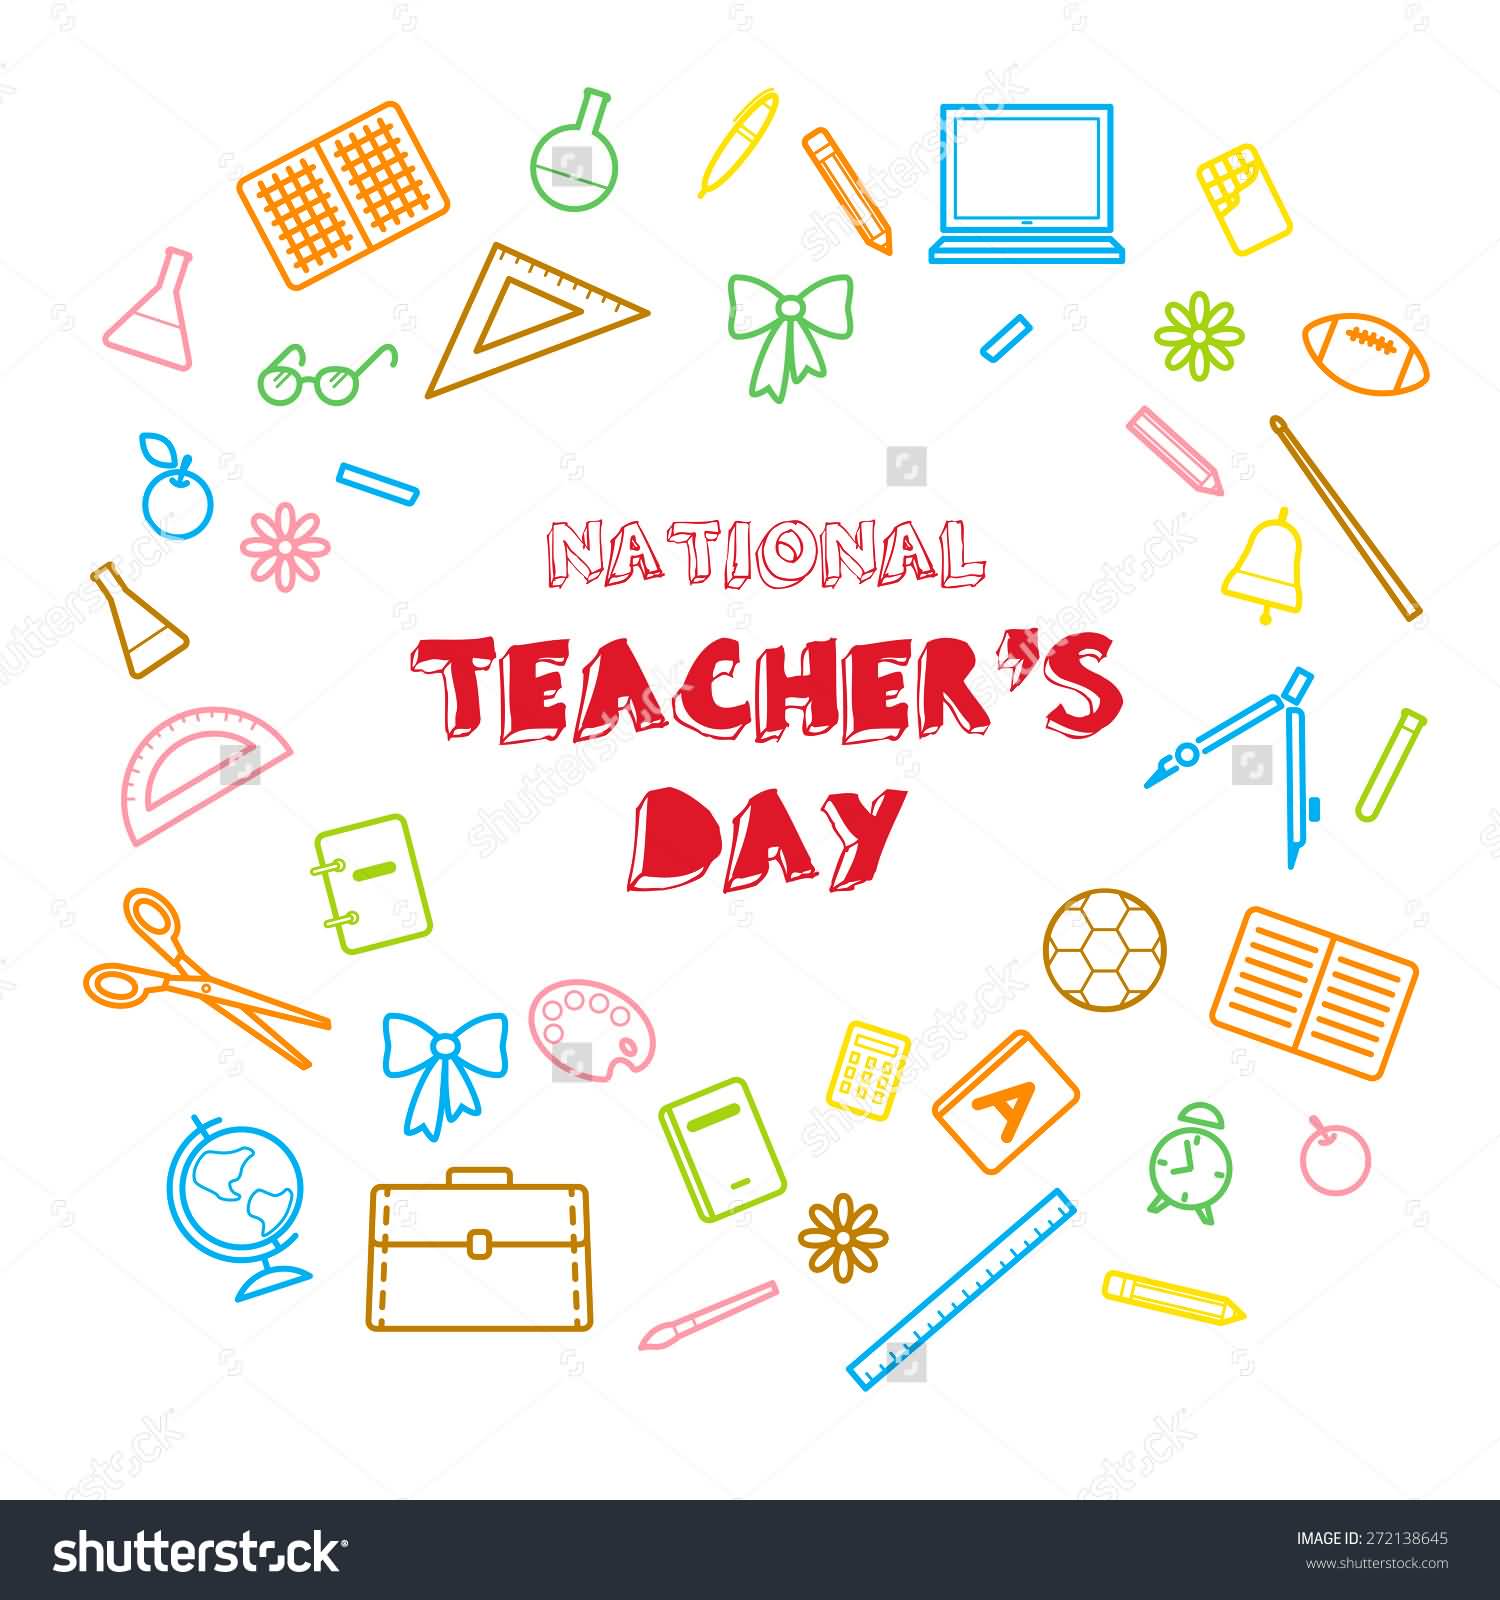 National Teacher’s Day Colorful Illustration